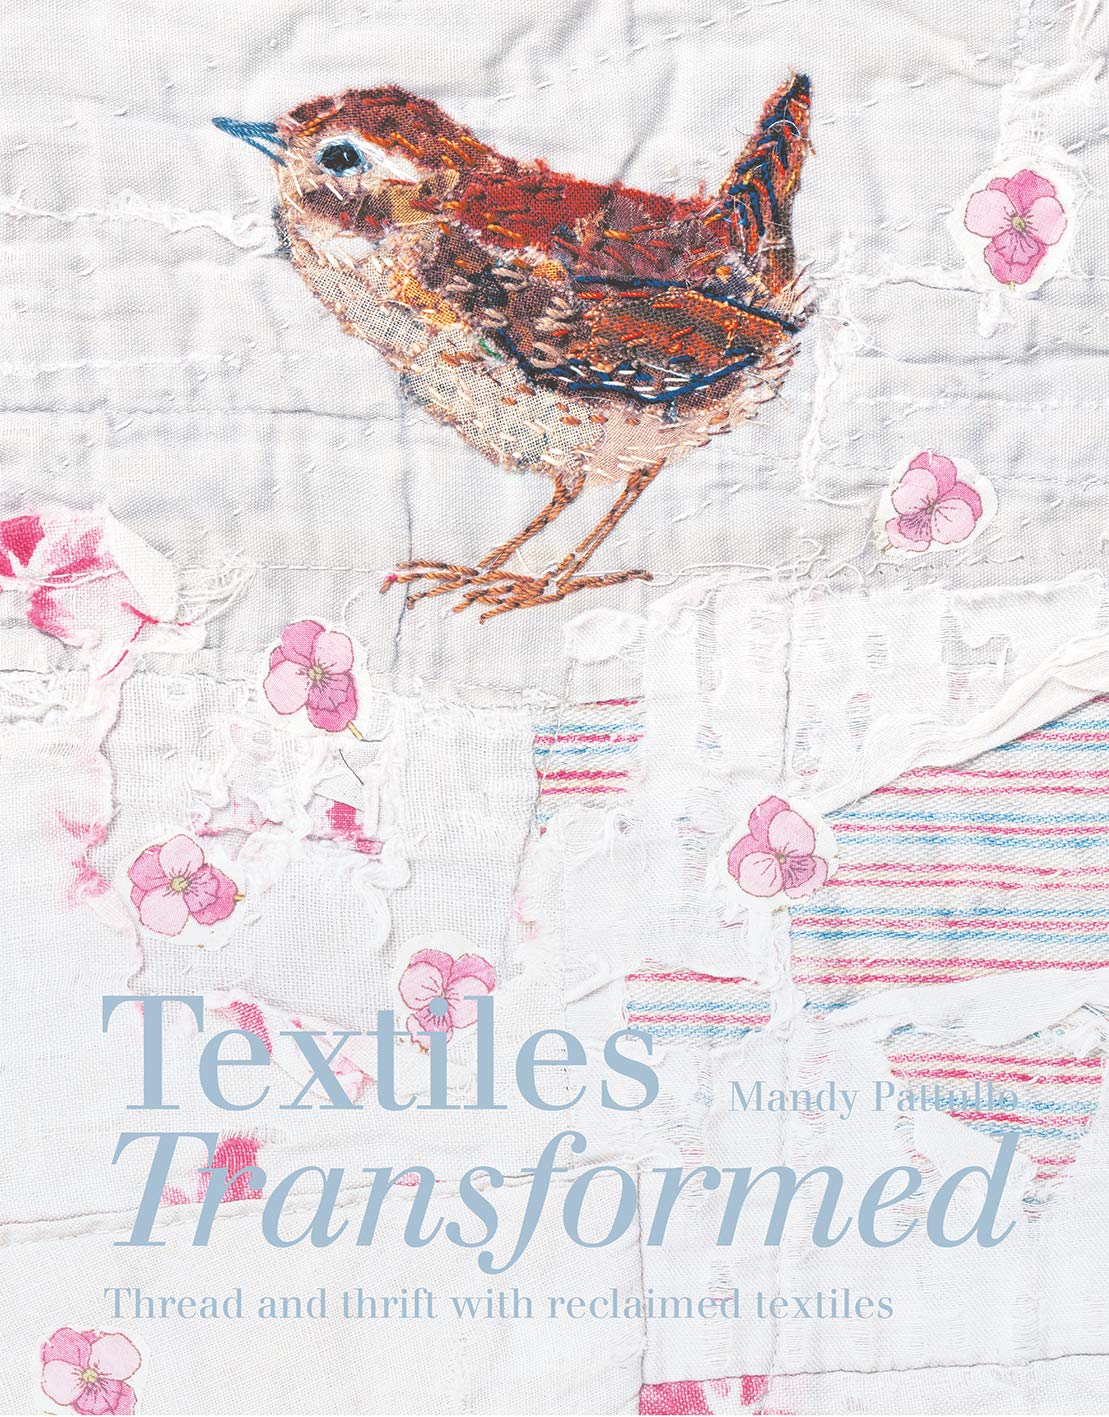 Textiles Transformed: Thread and thrift with reclaimed textiles by Mandy Pattullo